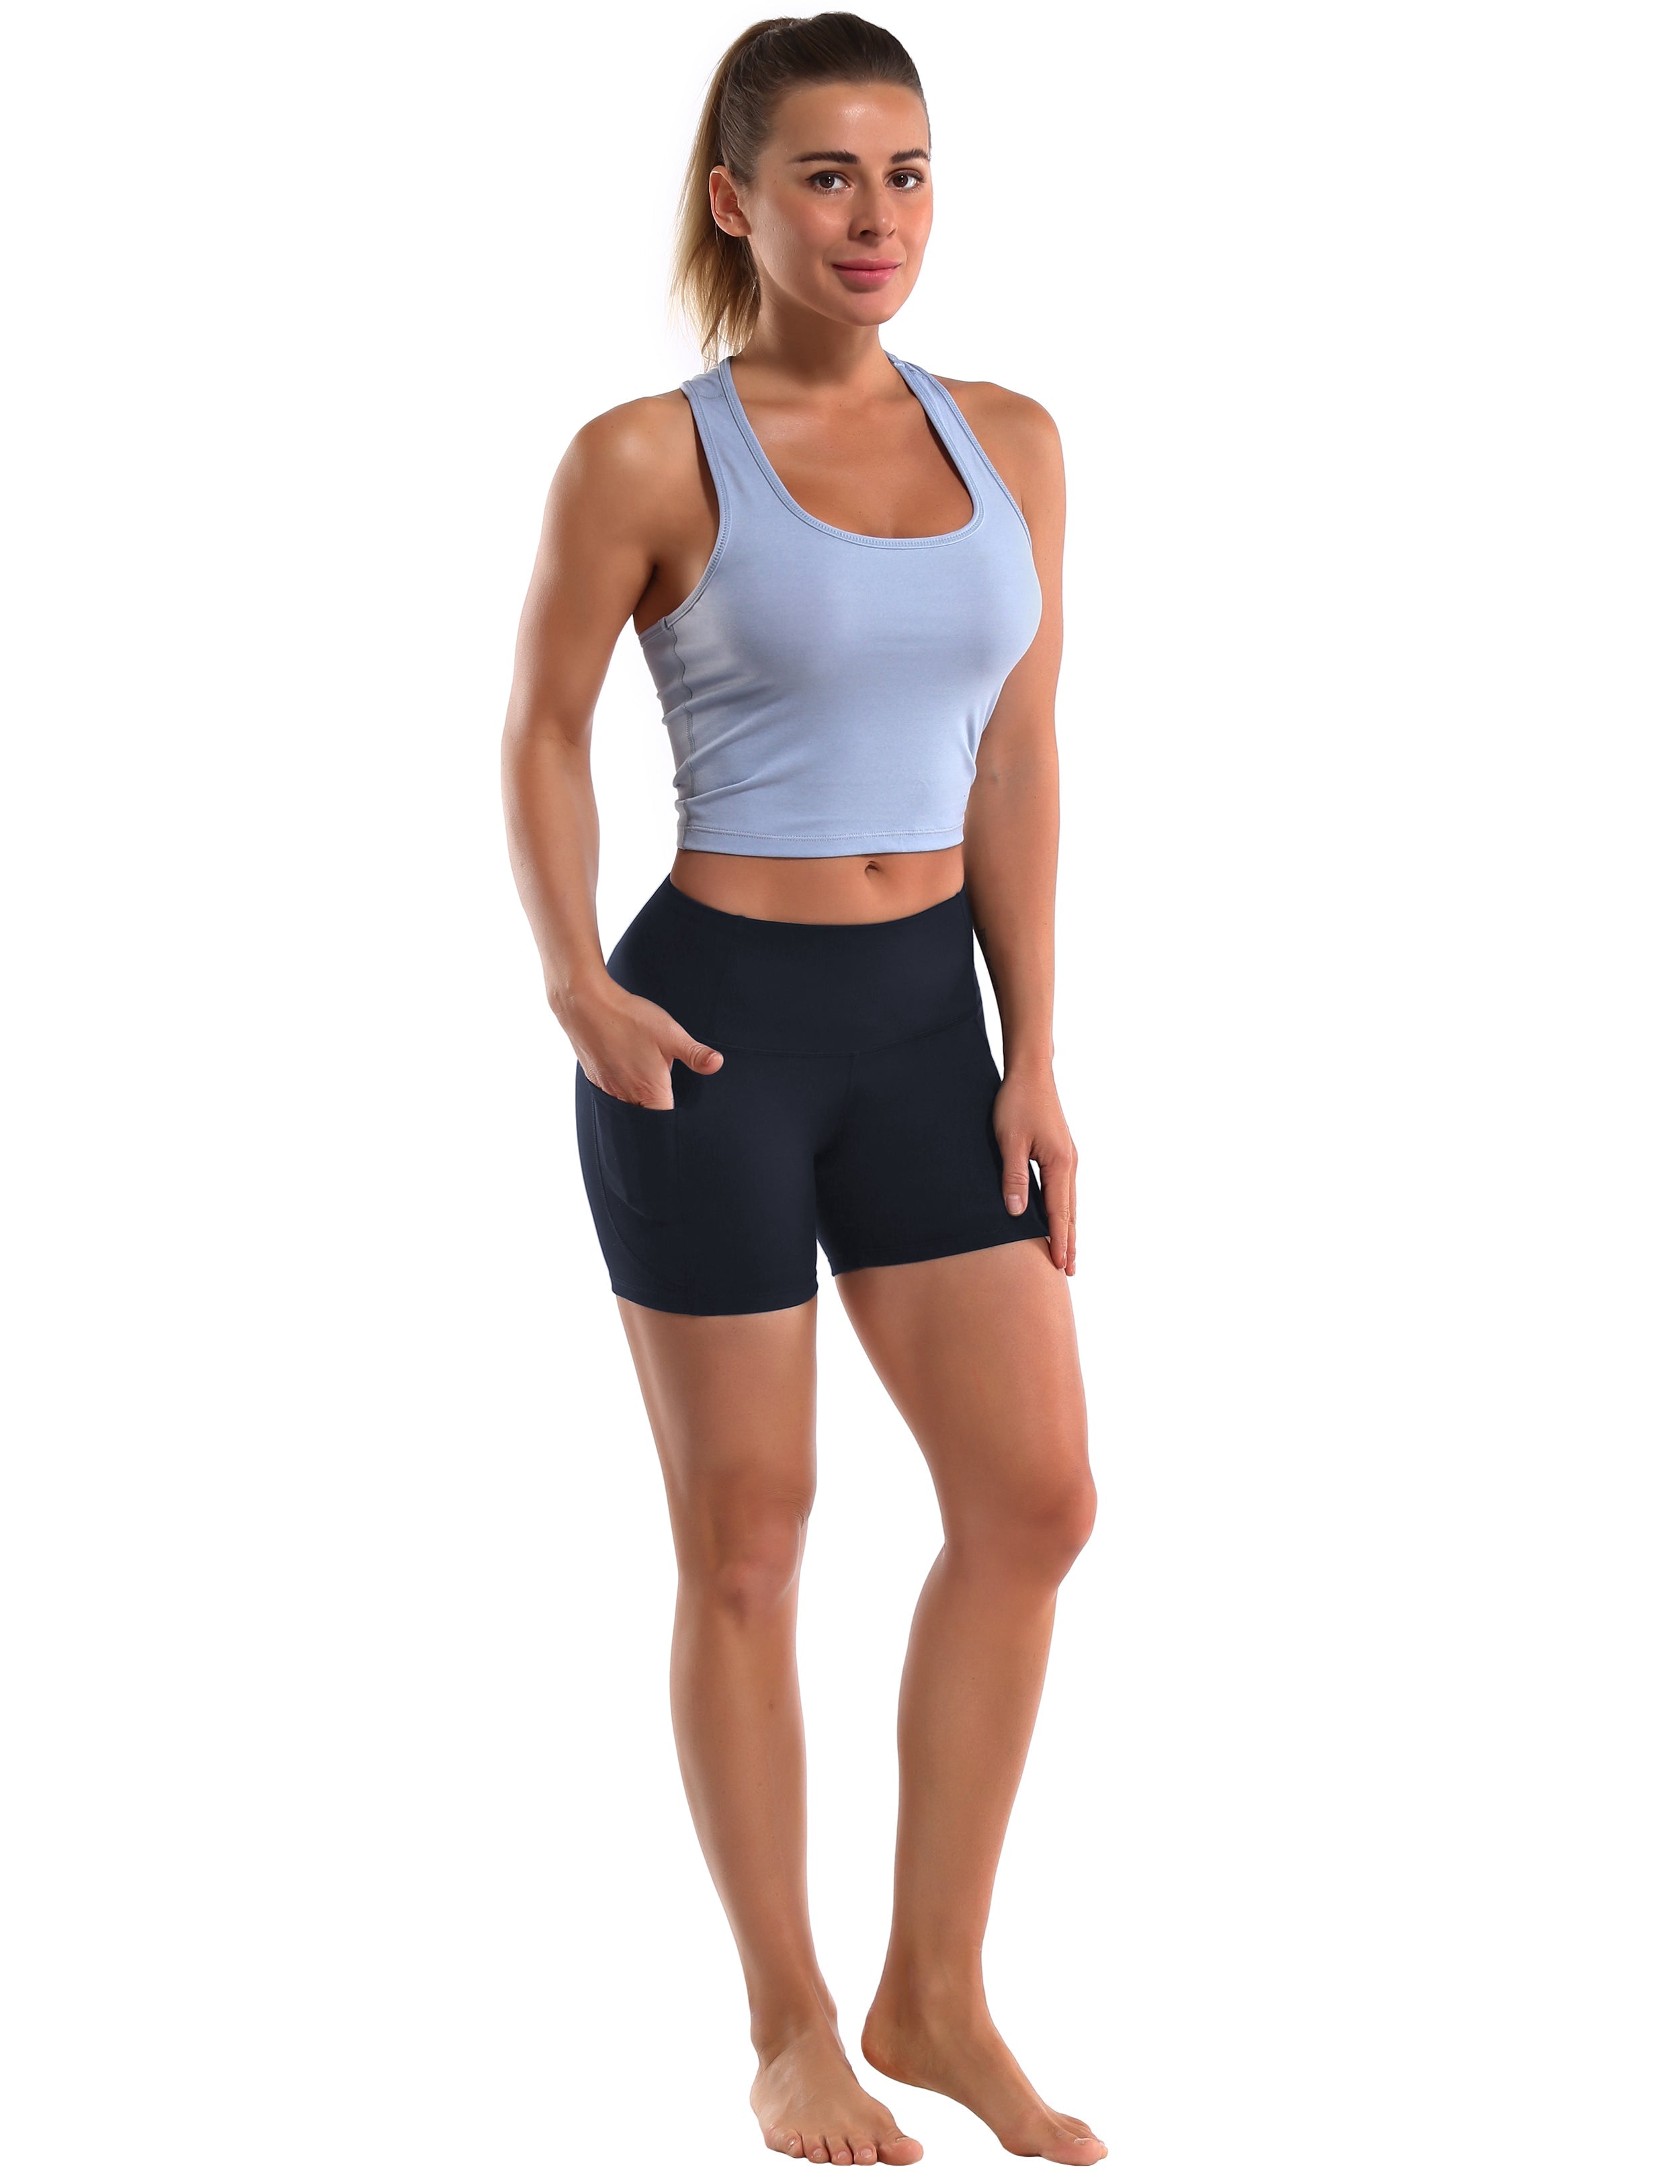 High Waist Side Pockets Pilates Shorts darkblue Softest-ever fabric High elasticity 4-way stretch Fabric doesn't attract lint easily No see-through Moisture-wicking Machine wash 88% Nylon, 12% Spandex